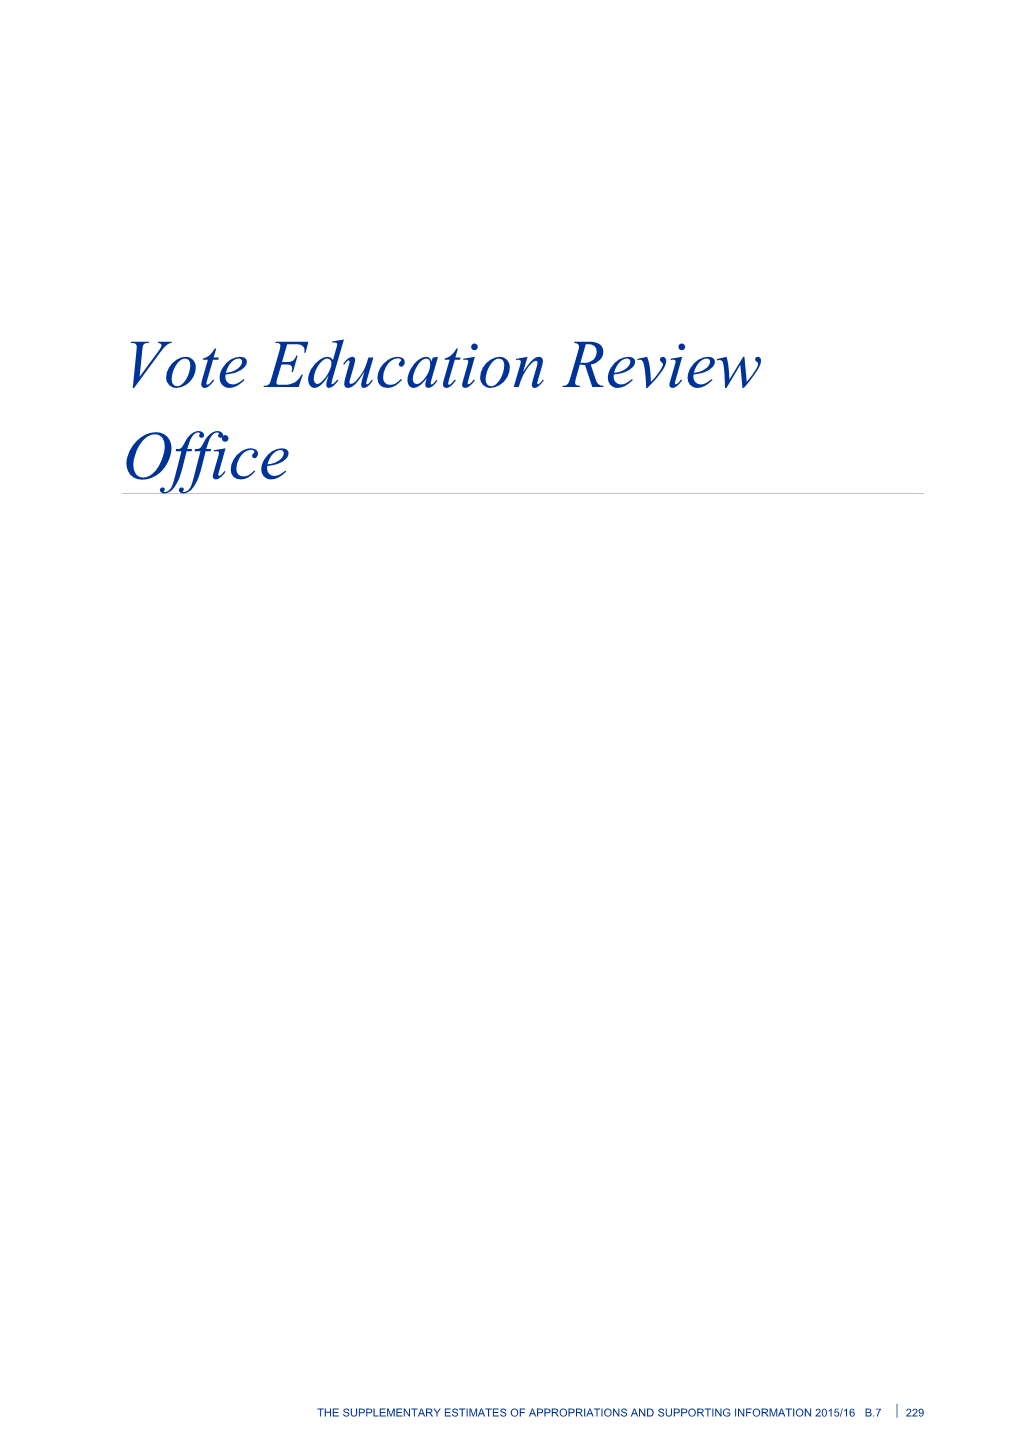 Vote Education Review Office - Supplementary Estimates of Appropriations 2015/16 - Budget 2016